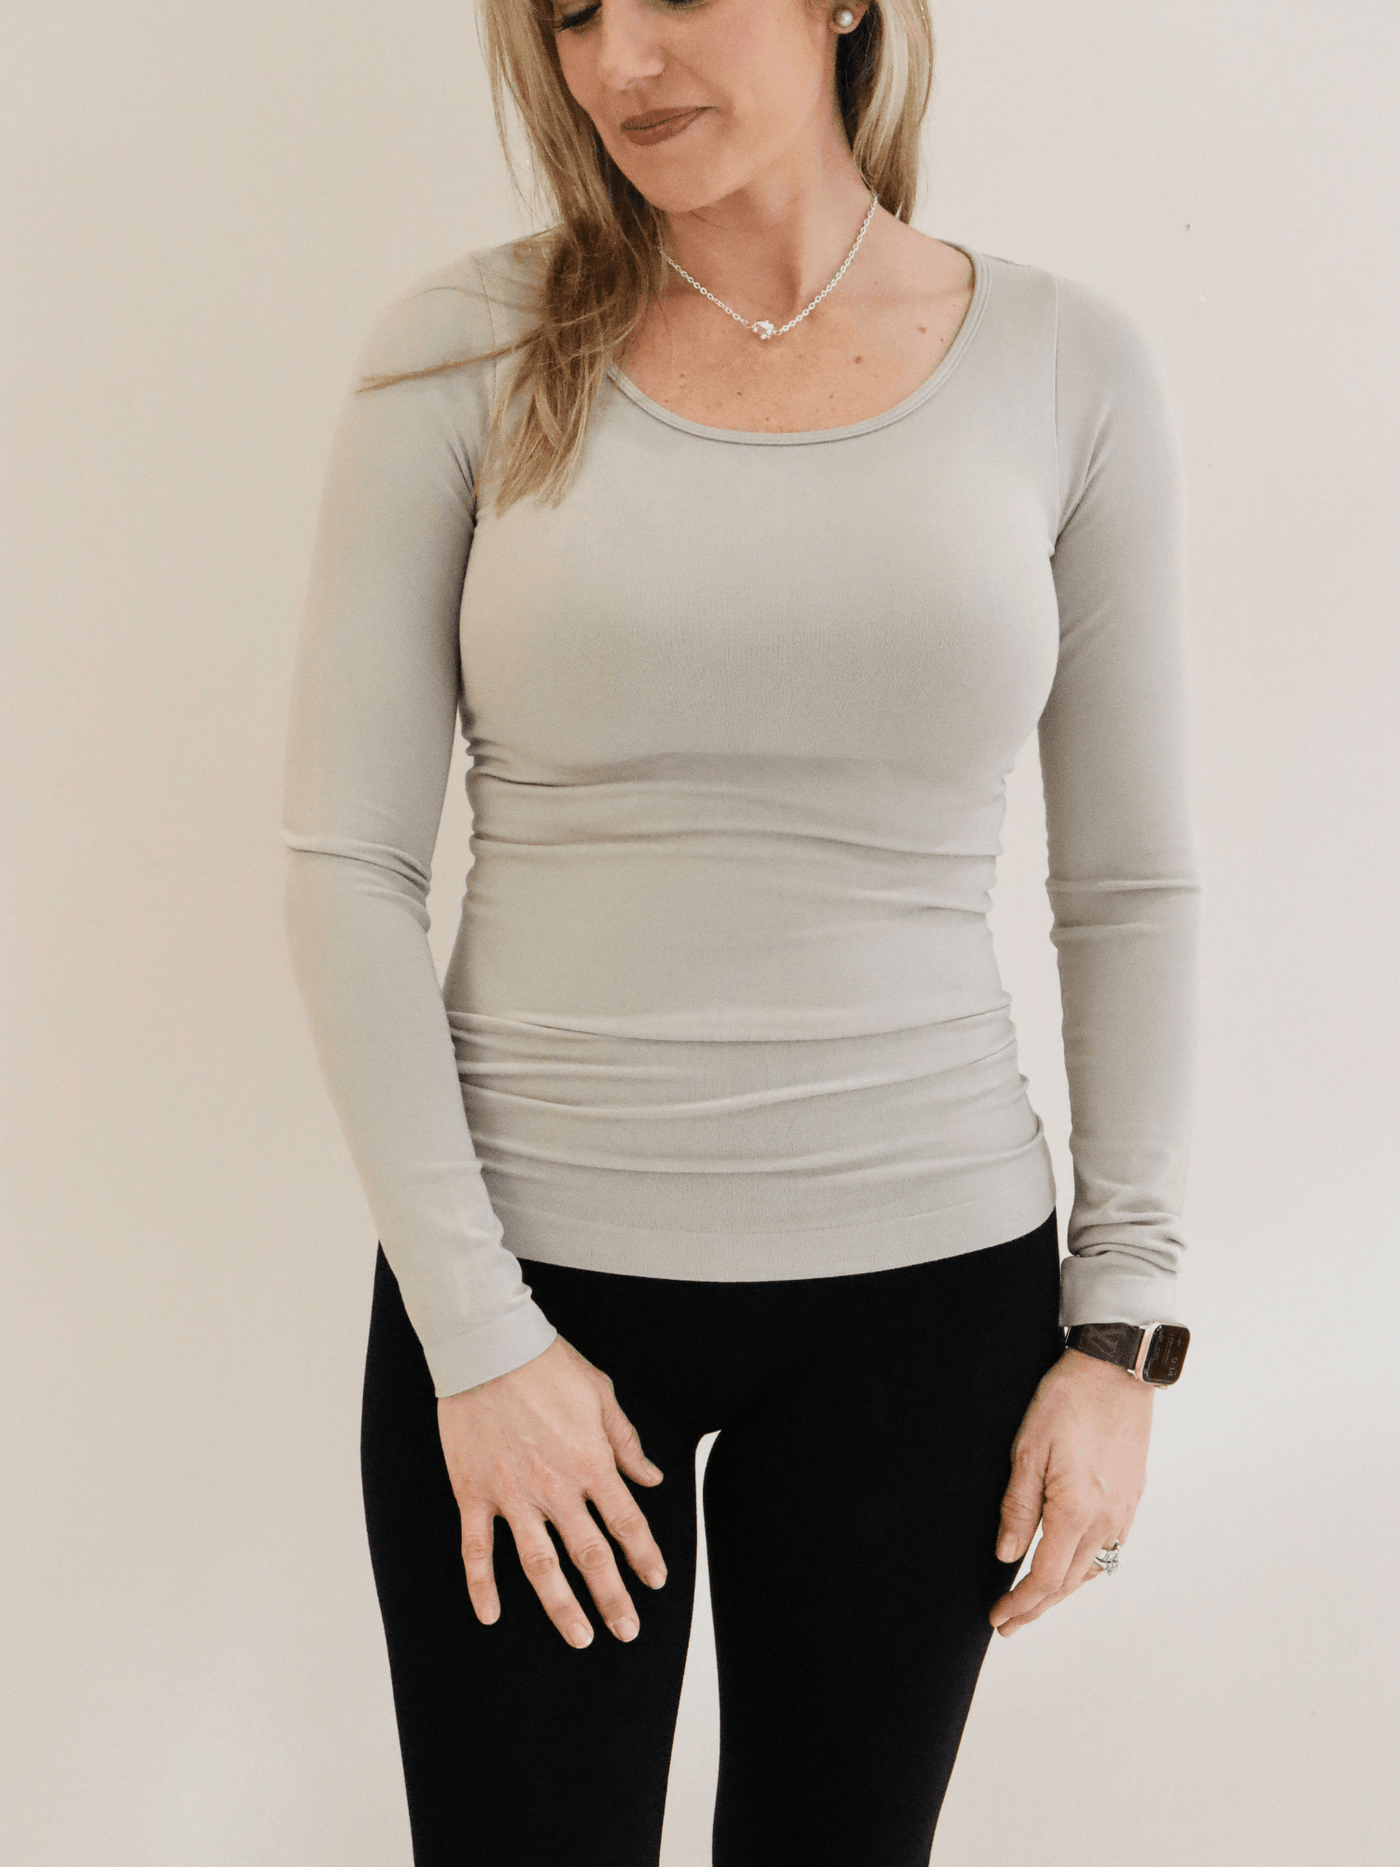 Solid Long Sleeve Round Collar Top tan front view.